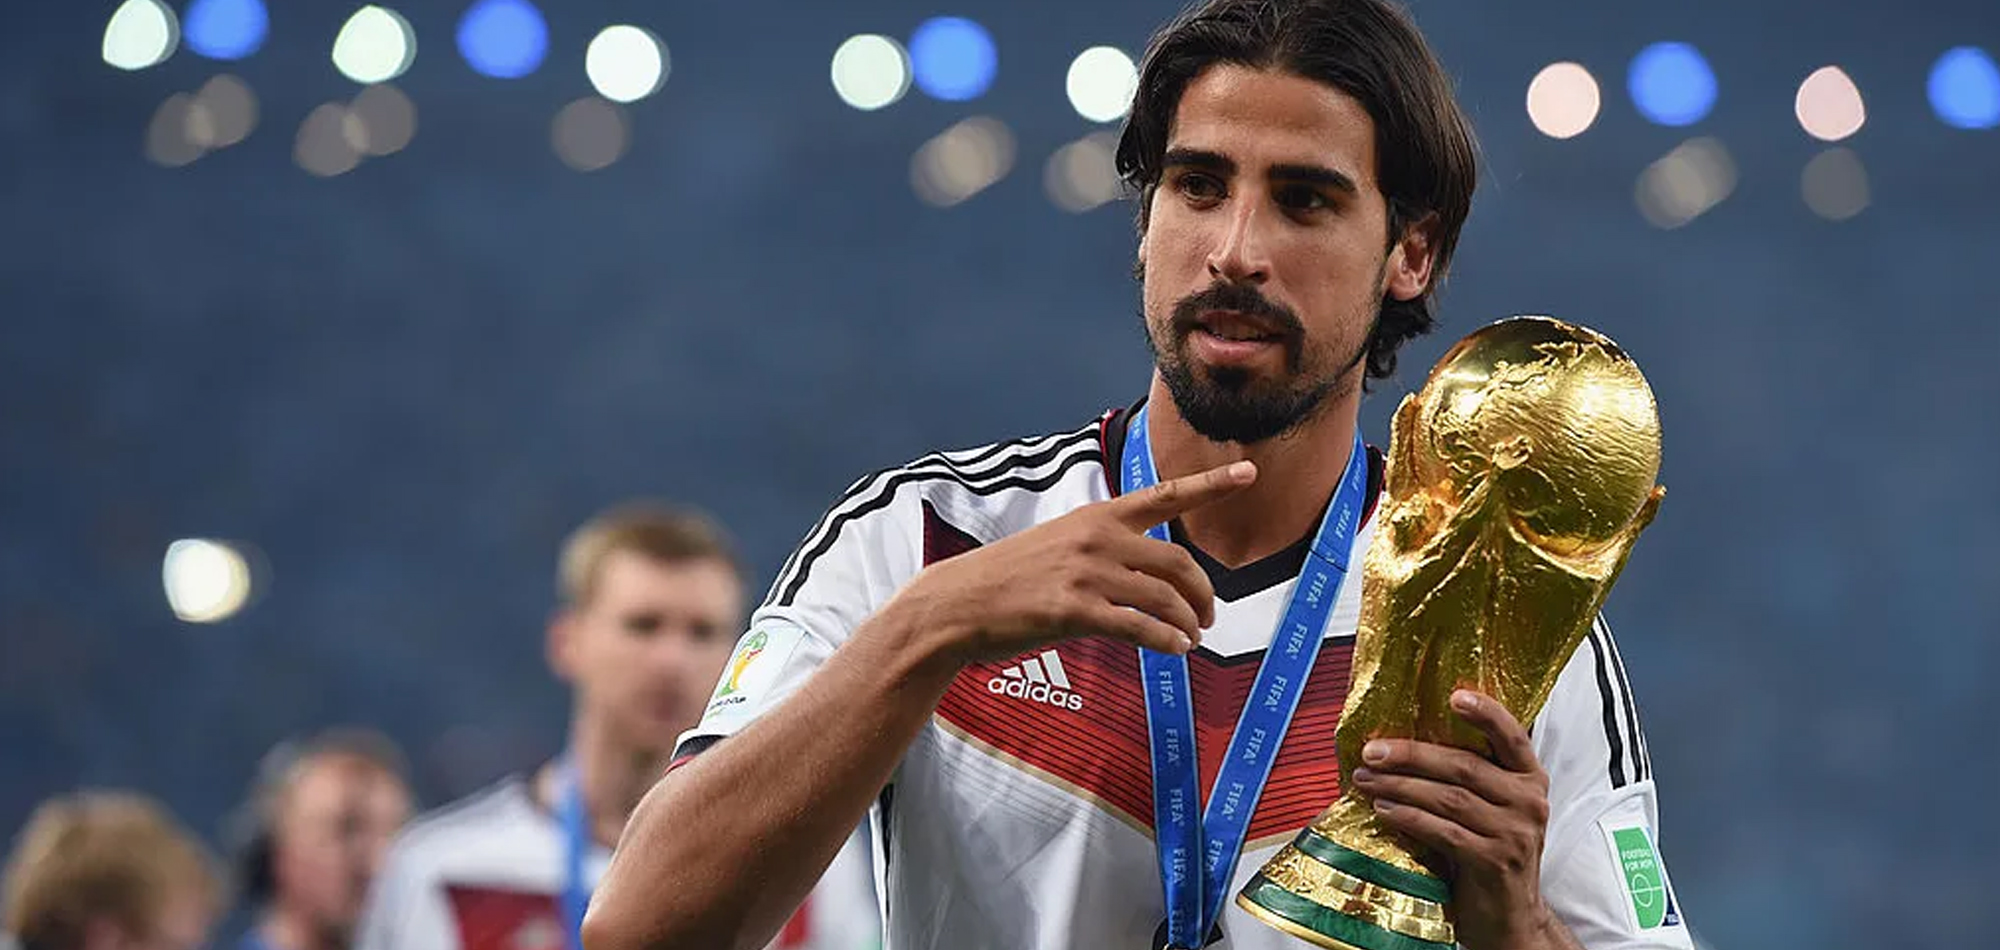 Former Germany, Real Madrid and Juventus star Khedira announces retirement at age 34